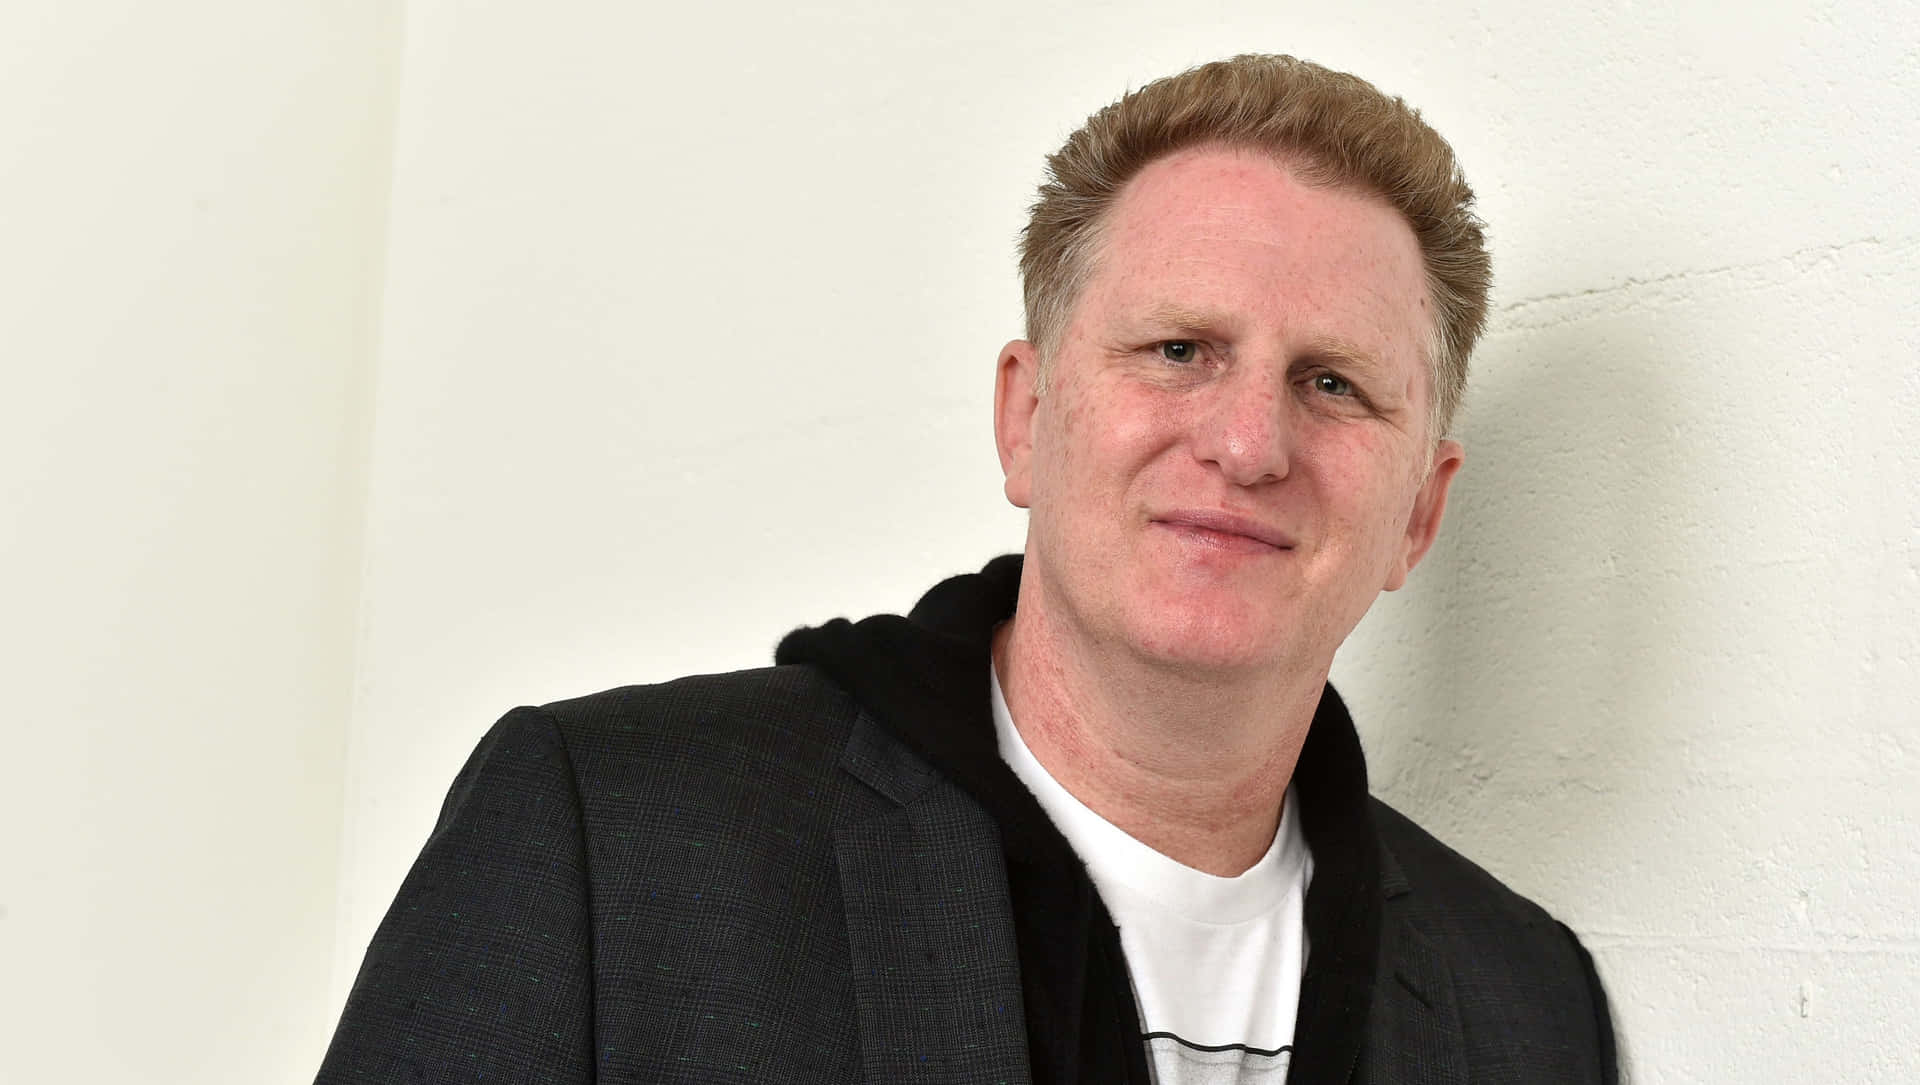 Actor Michael Rapaport poses for the camera during an outing Wallpaper